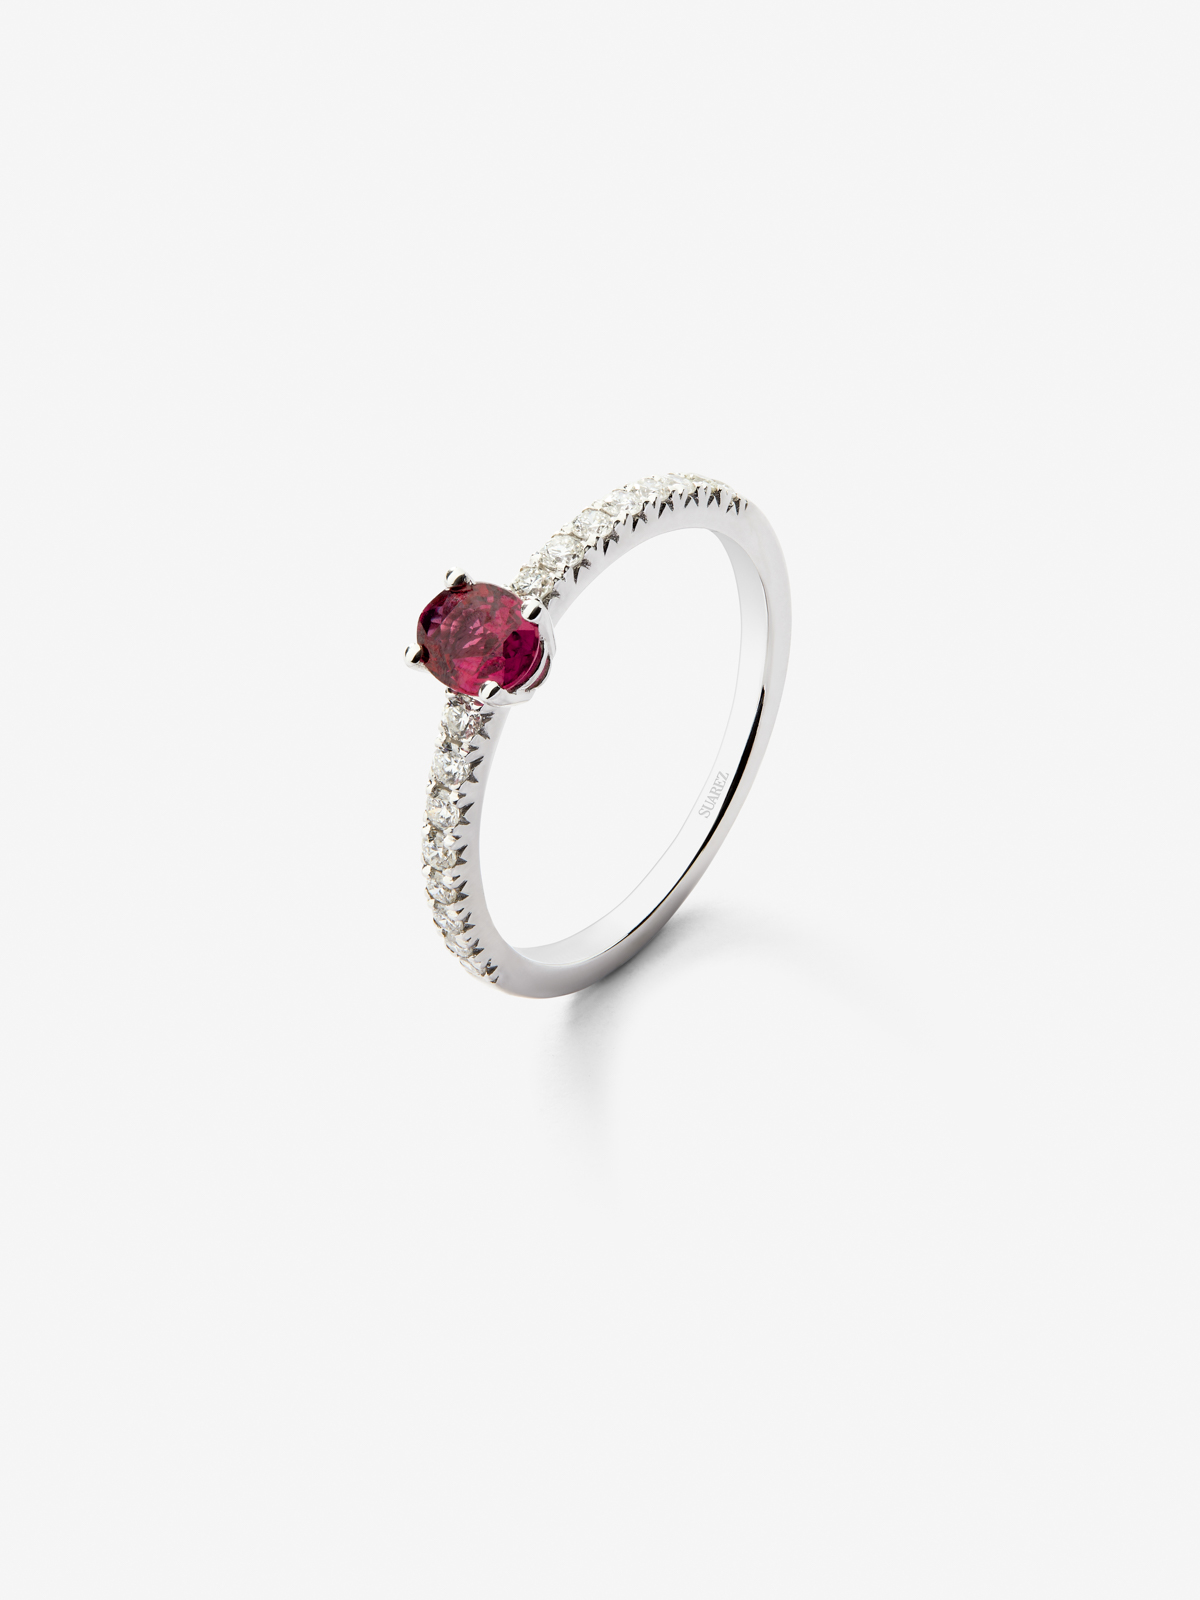 18K White Gold Ring with Red Ruby in 0.5 cts and white diamonds in 0.21 cts bright diamonds